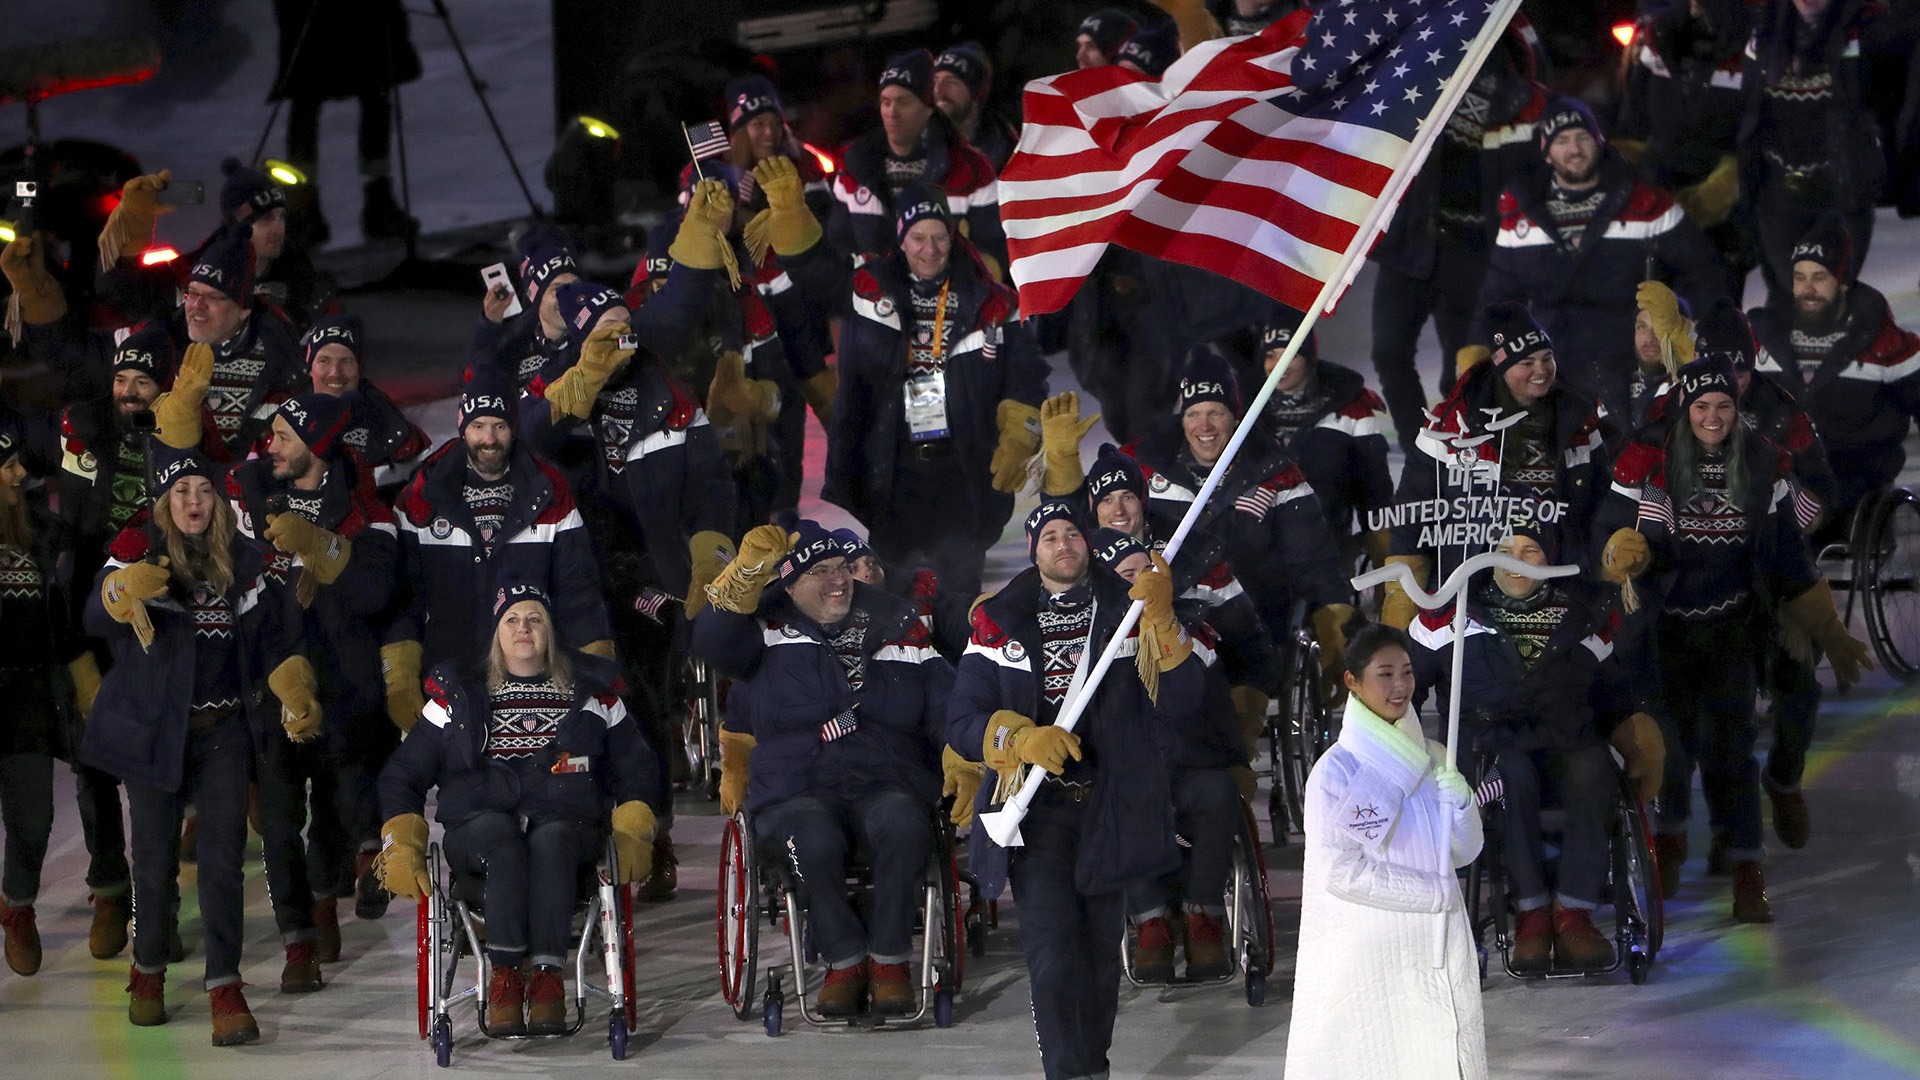 Mike Schultz carries the flag of the United States as he leads his delegation into the opening ceremony.